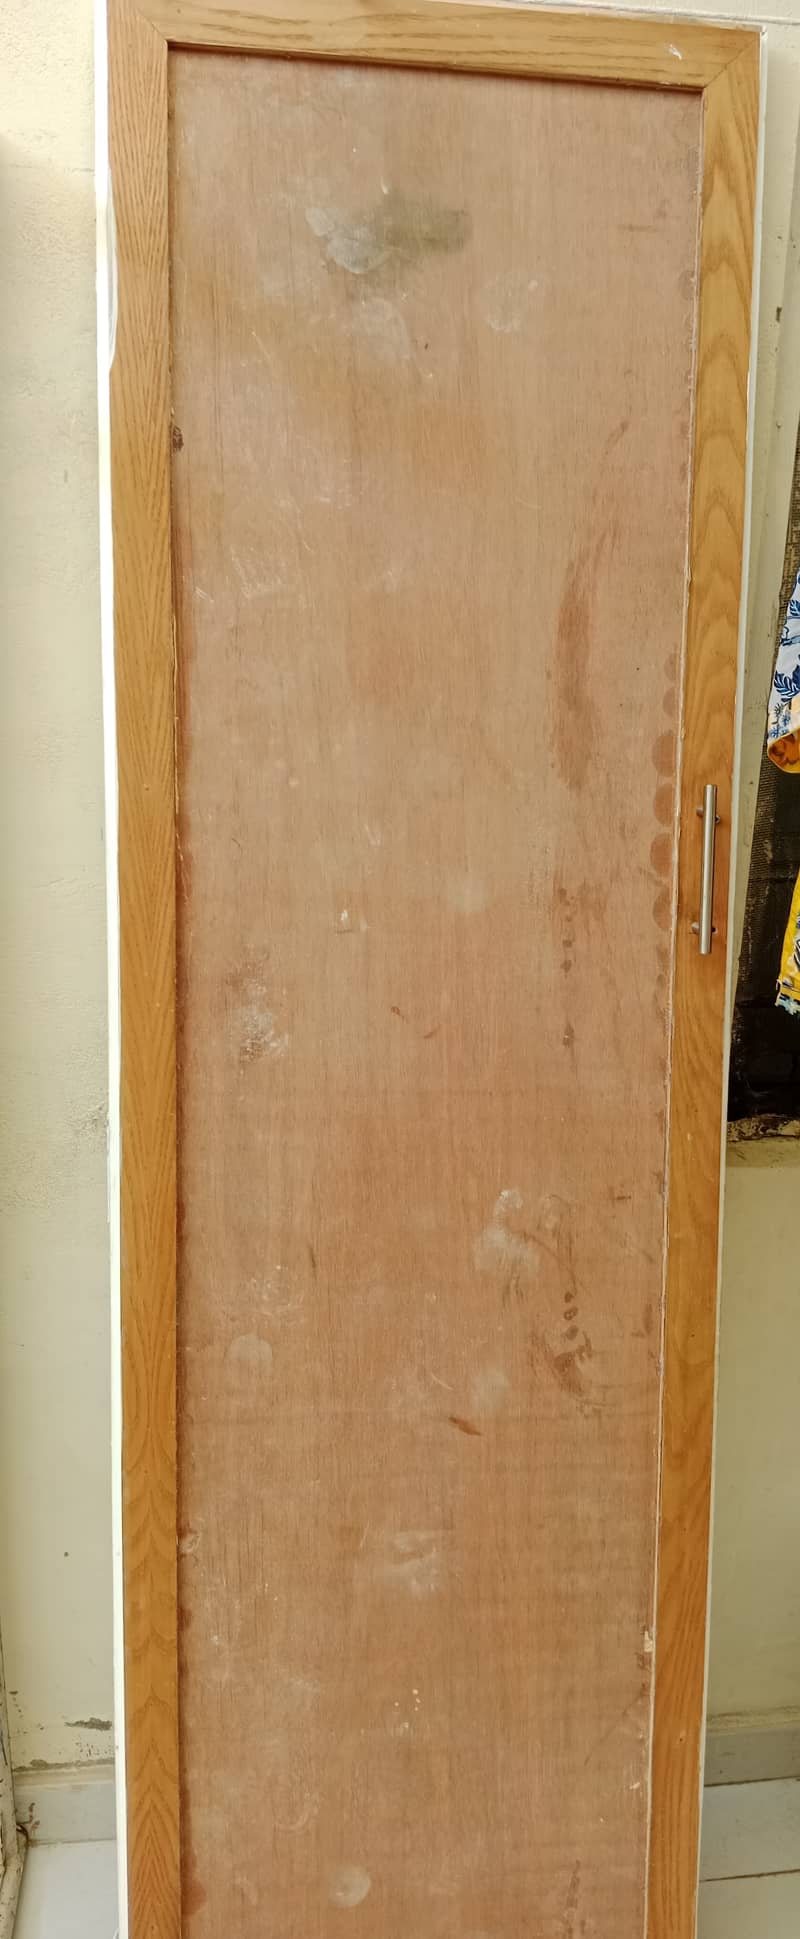 Door for sale neat and clean only WhatsUp 03060103003 14